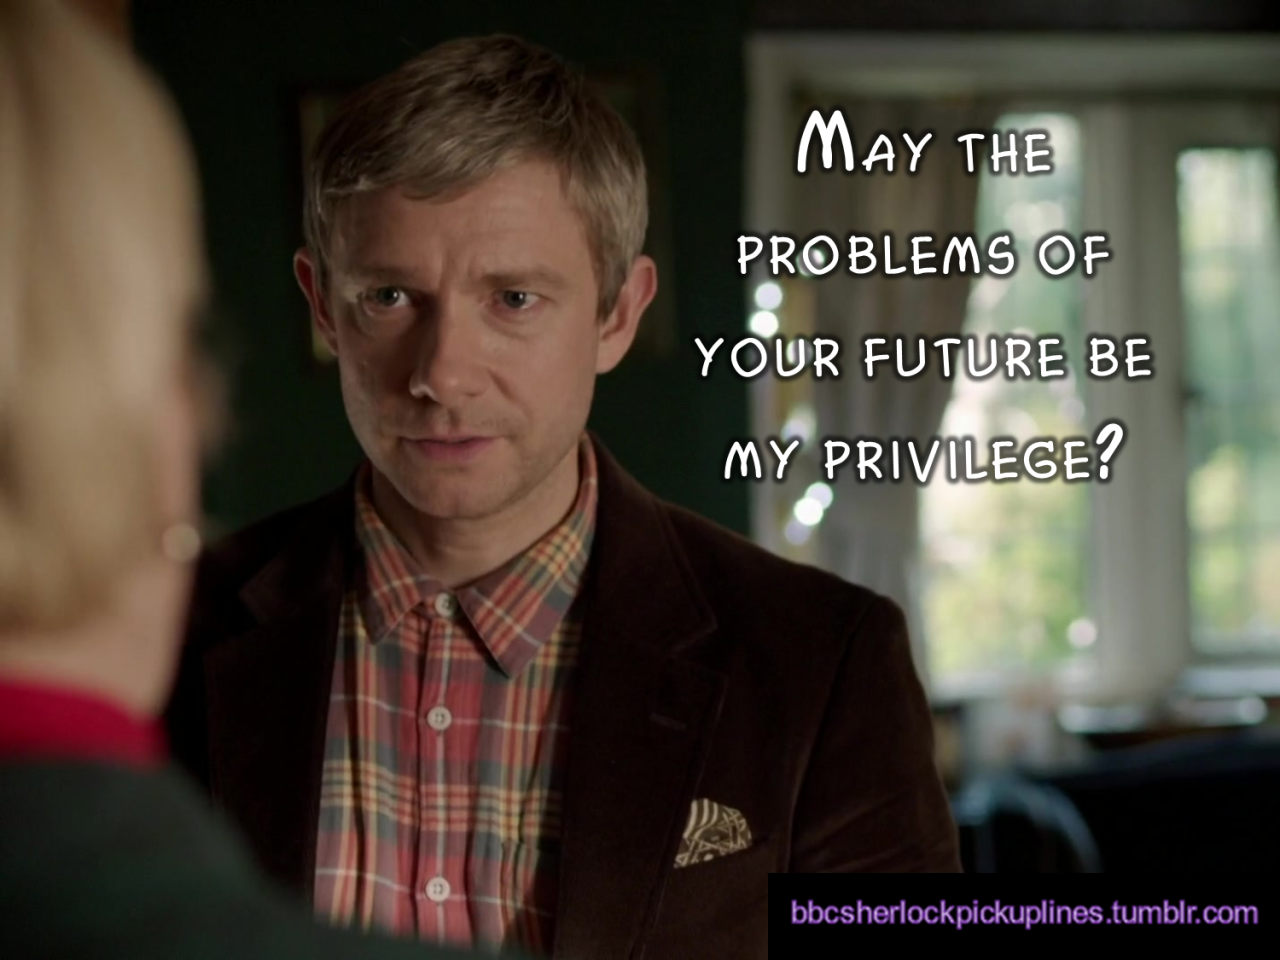 &ldquo;May the problems of your future be my privilege?&rdquo;